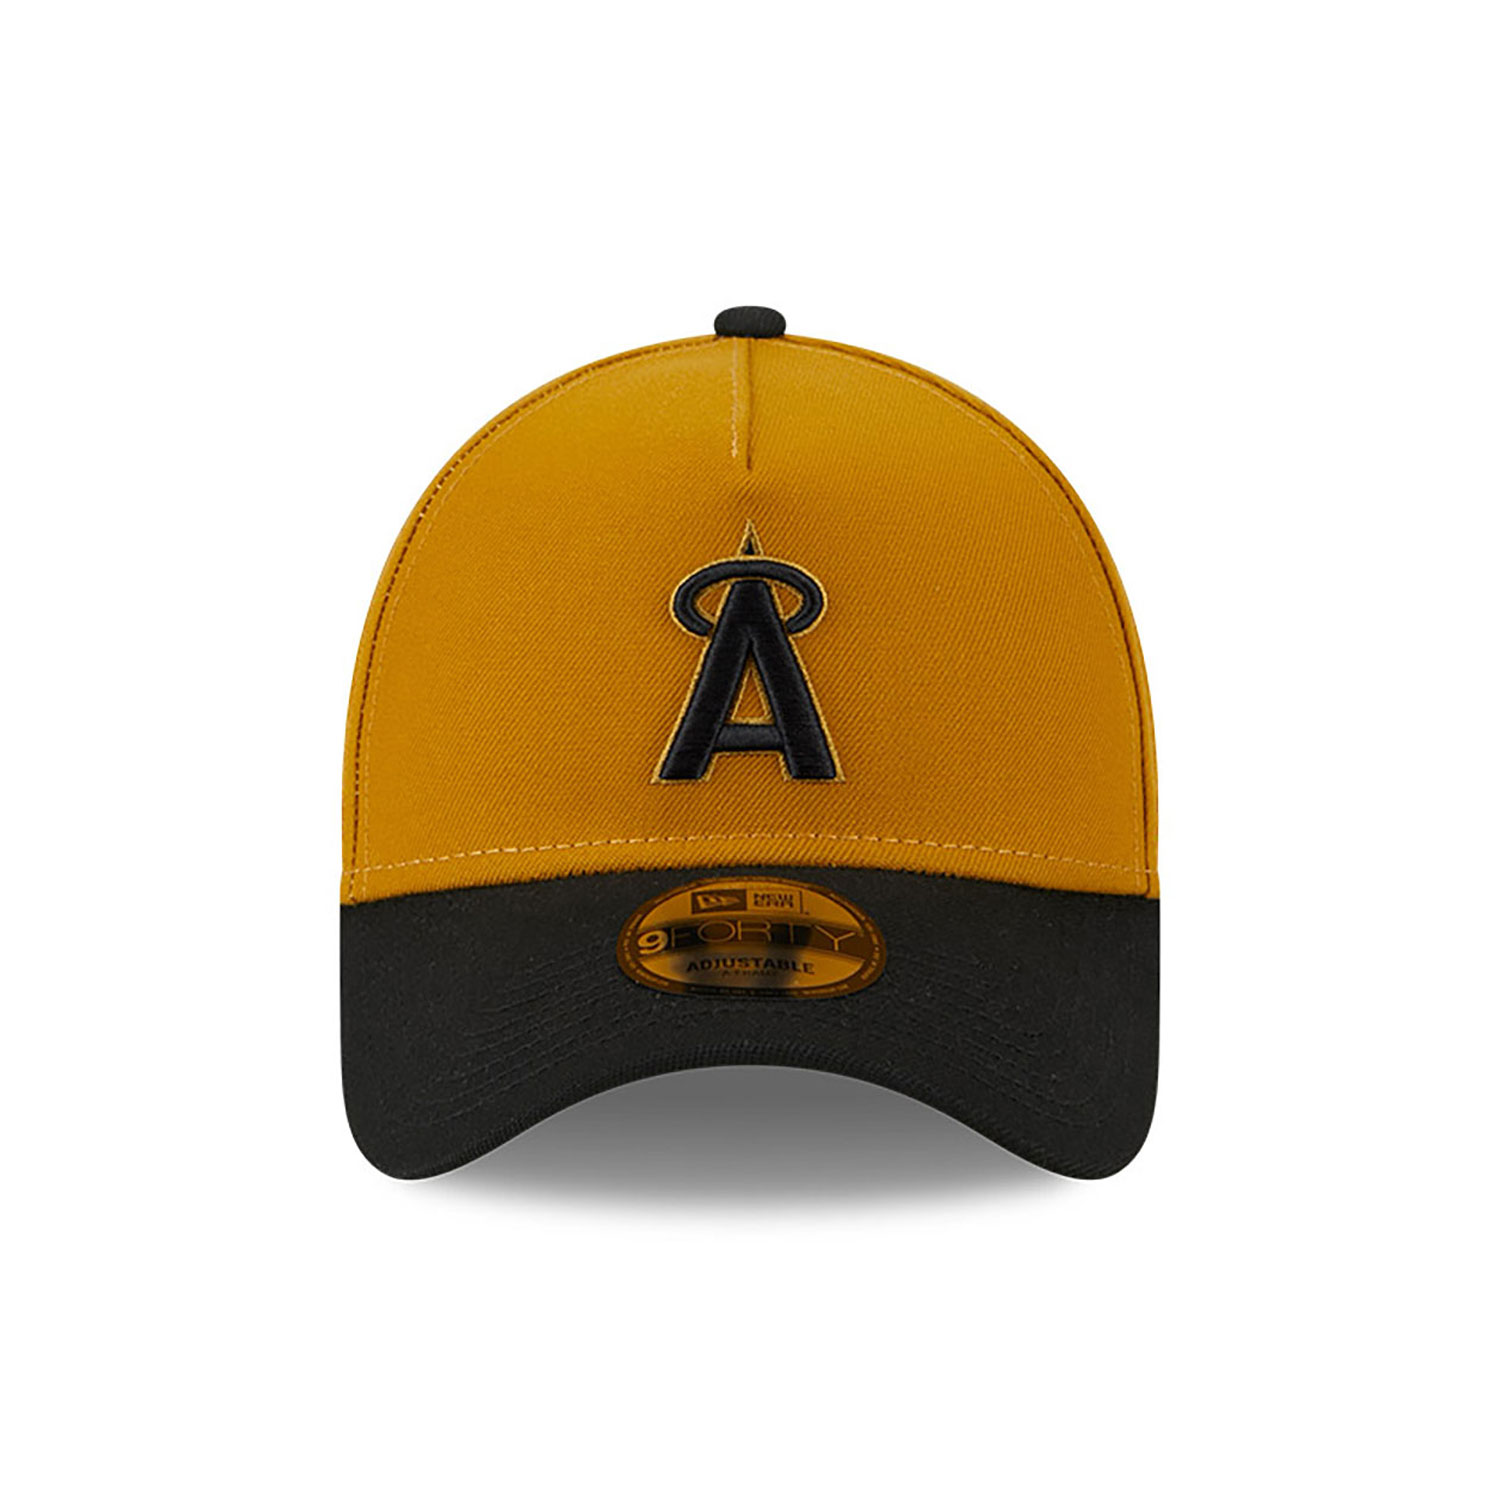 Anaheim Angels Rustic Fall Gold A-Frame 9FORTY Adjustable Cap